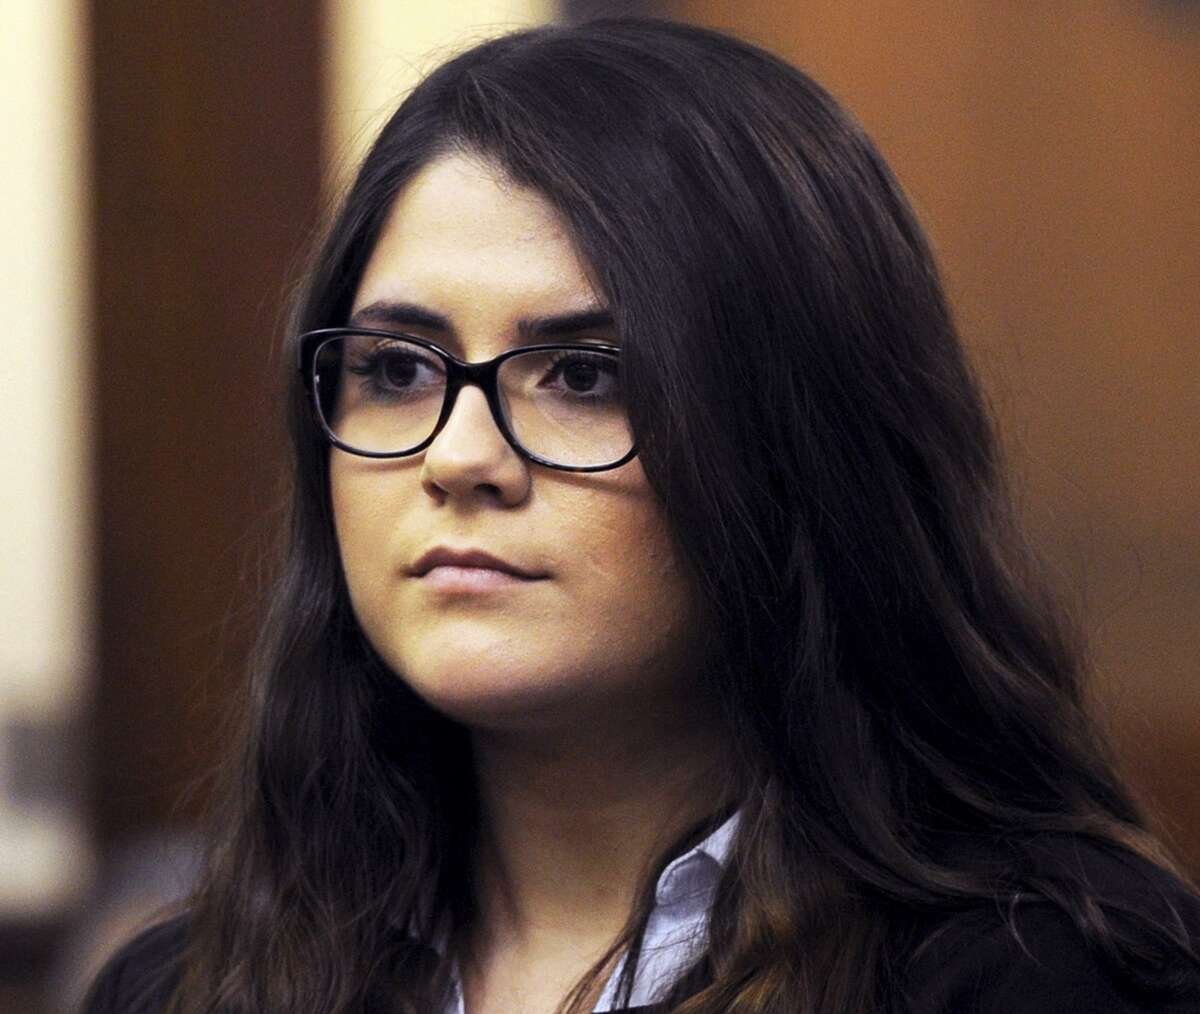 A judge cleared the way Monday for jury selection to begin in the trial of Nikki Yovino who is accused of making up rape allegations against two Sacred Heart University football players.